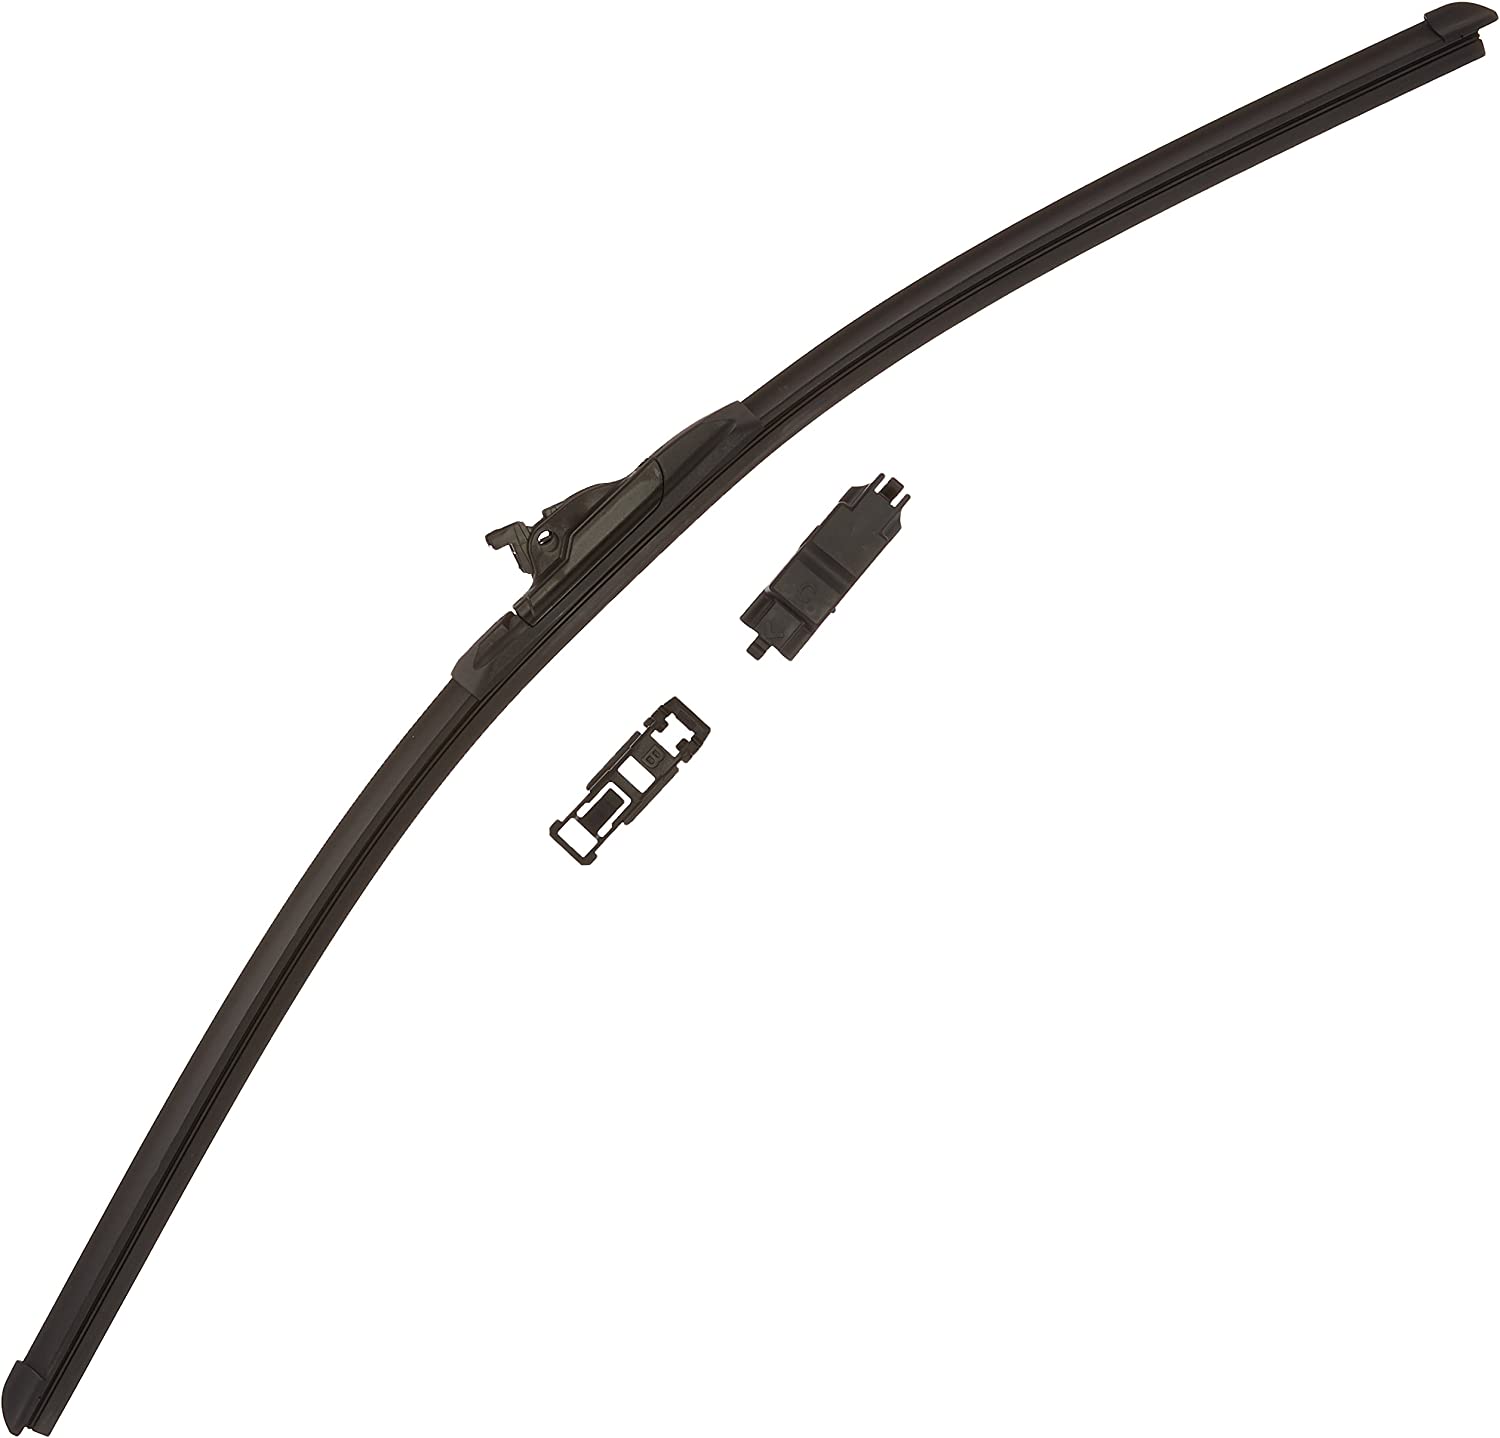 Wiper Blade for Select 2010-2019 Ford Vehicles